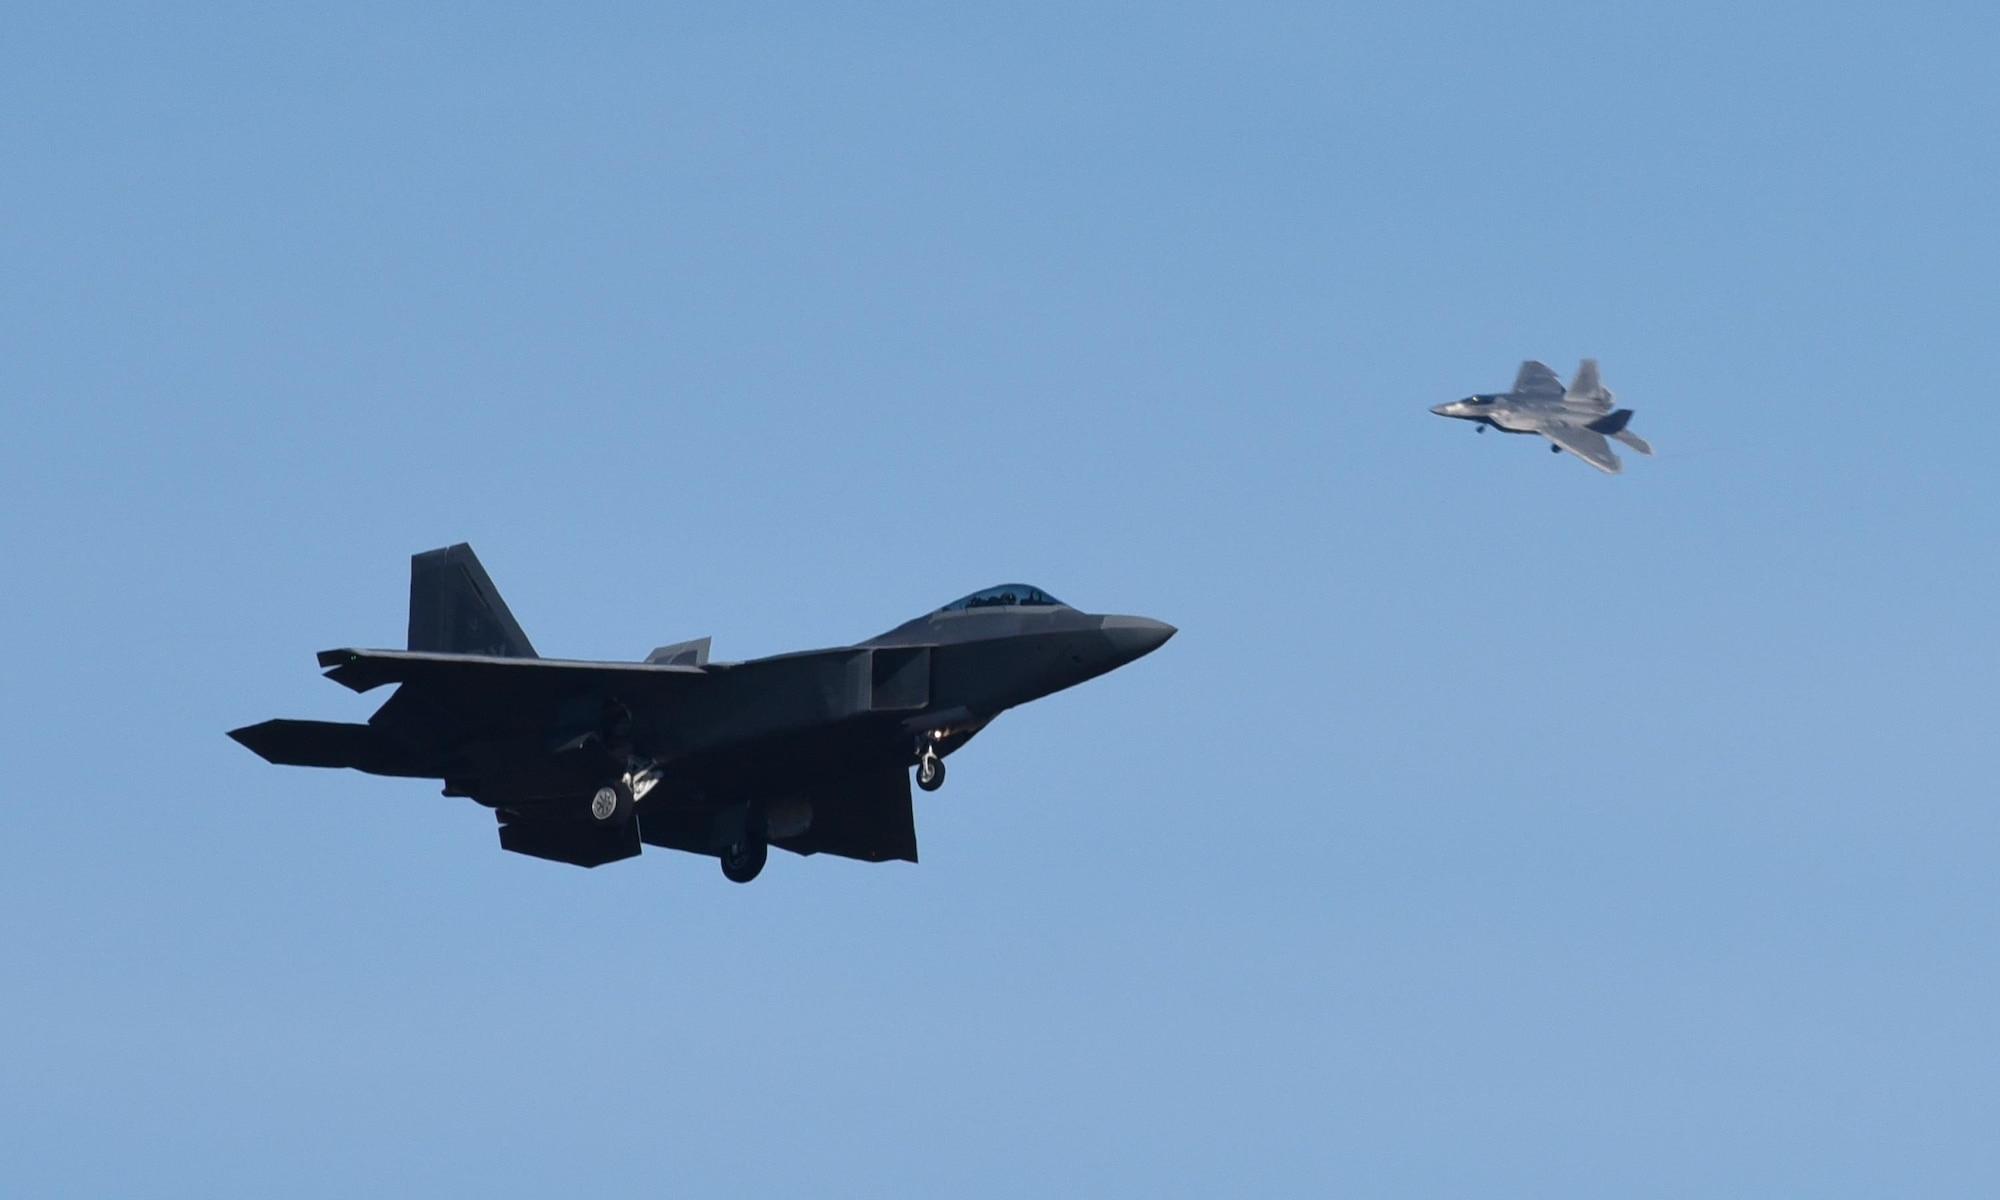 Two U.S. Air Force F-22 Raptors from Tyndall Air Force Base, Fla., fly over the base during Checkered Flag 17-1, Dec. 16, 2016. The integration training pilots receive during exercises like Checkered Flag ensure teams of different capabilities can seamlessly integrate and work together in a real-world combat situation utilizing fifth- and fourth-generation air assets. (U.S. Air Force photo by Staff Sgt. Alex Fox Echols III/Released)